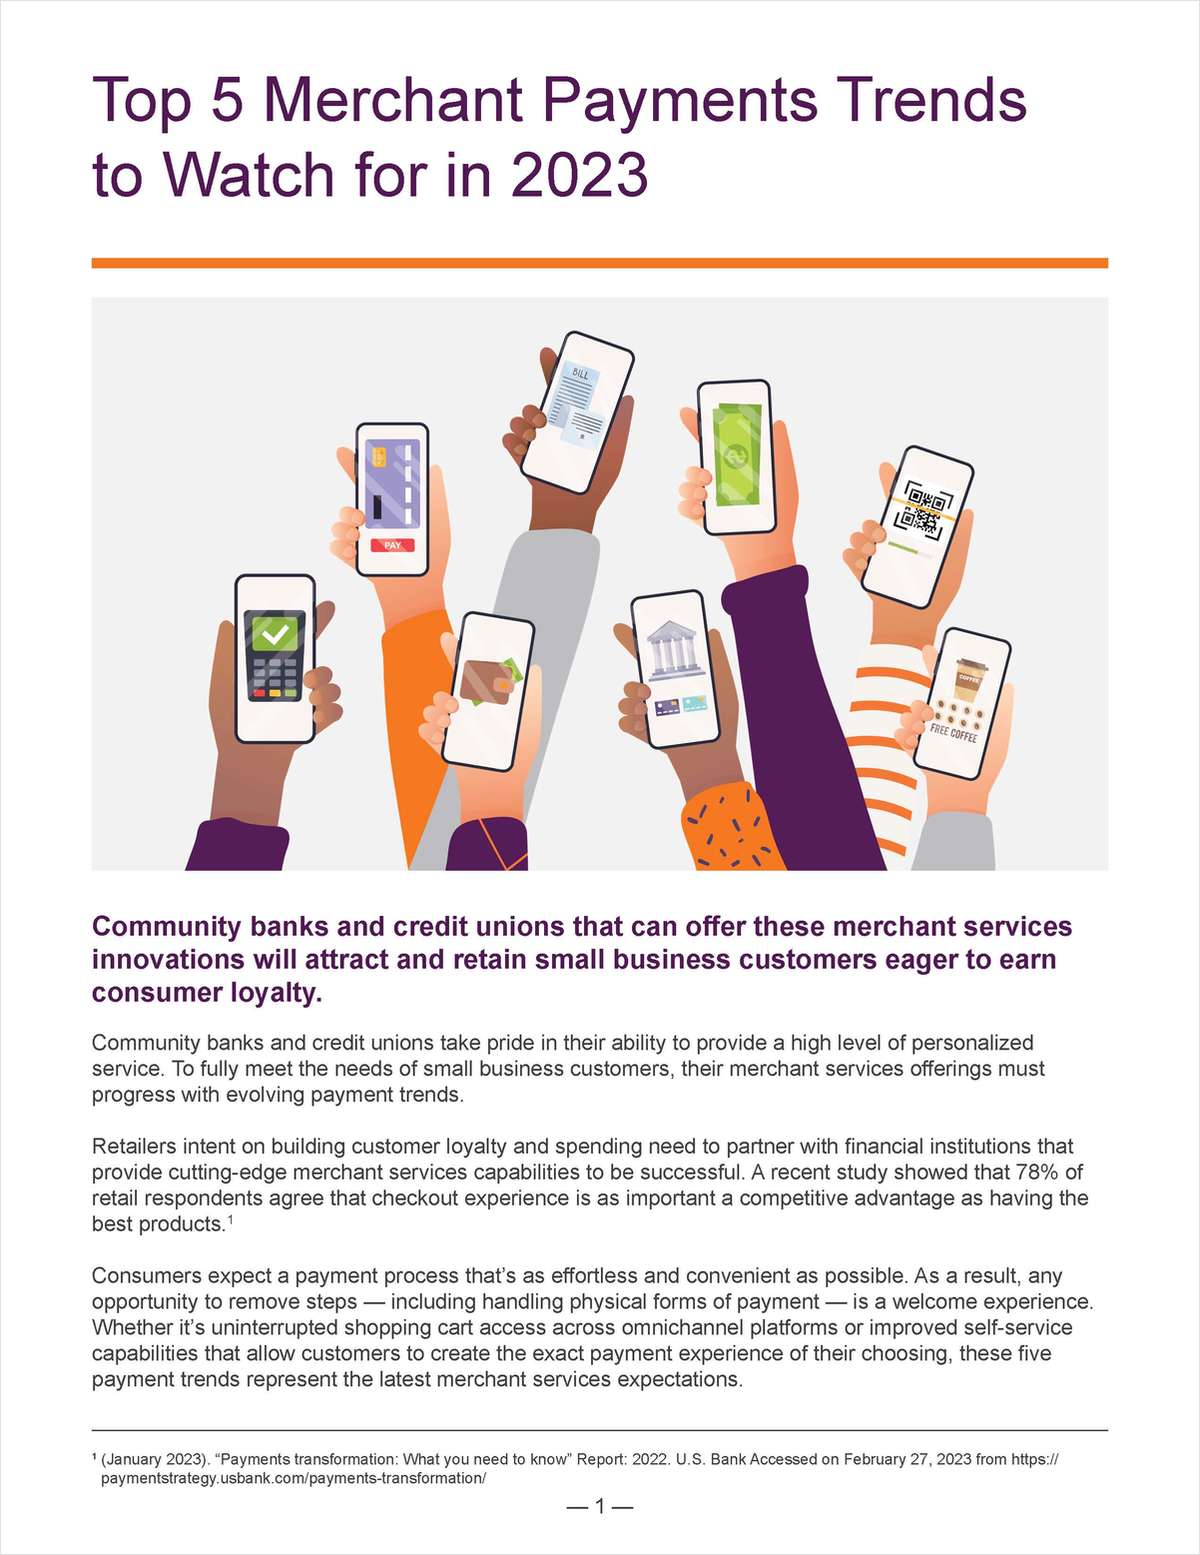 Top 5 Merchant Payments Trends to Watch for in 2023